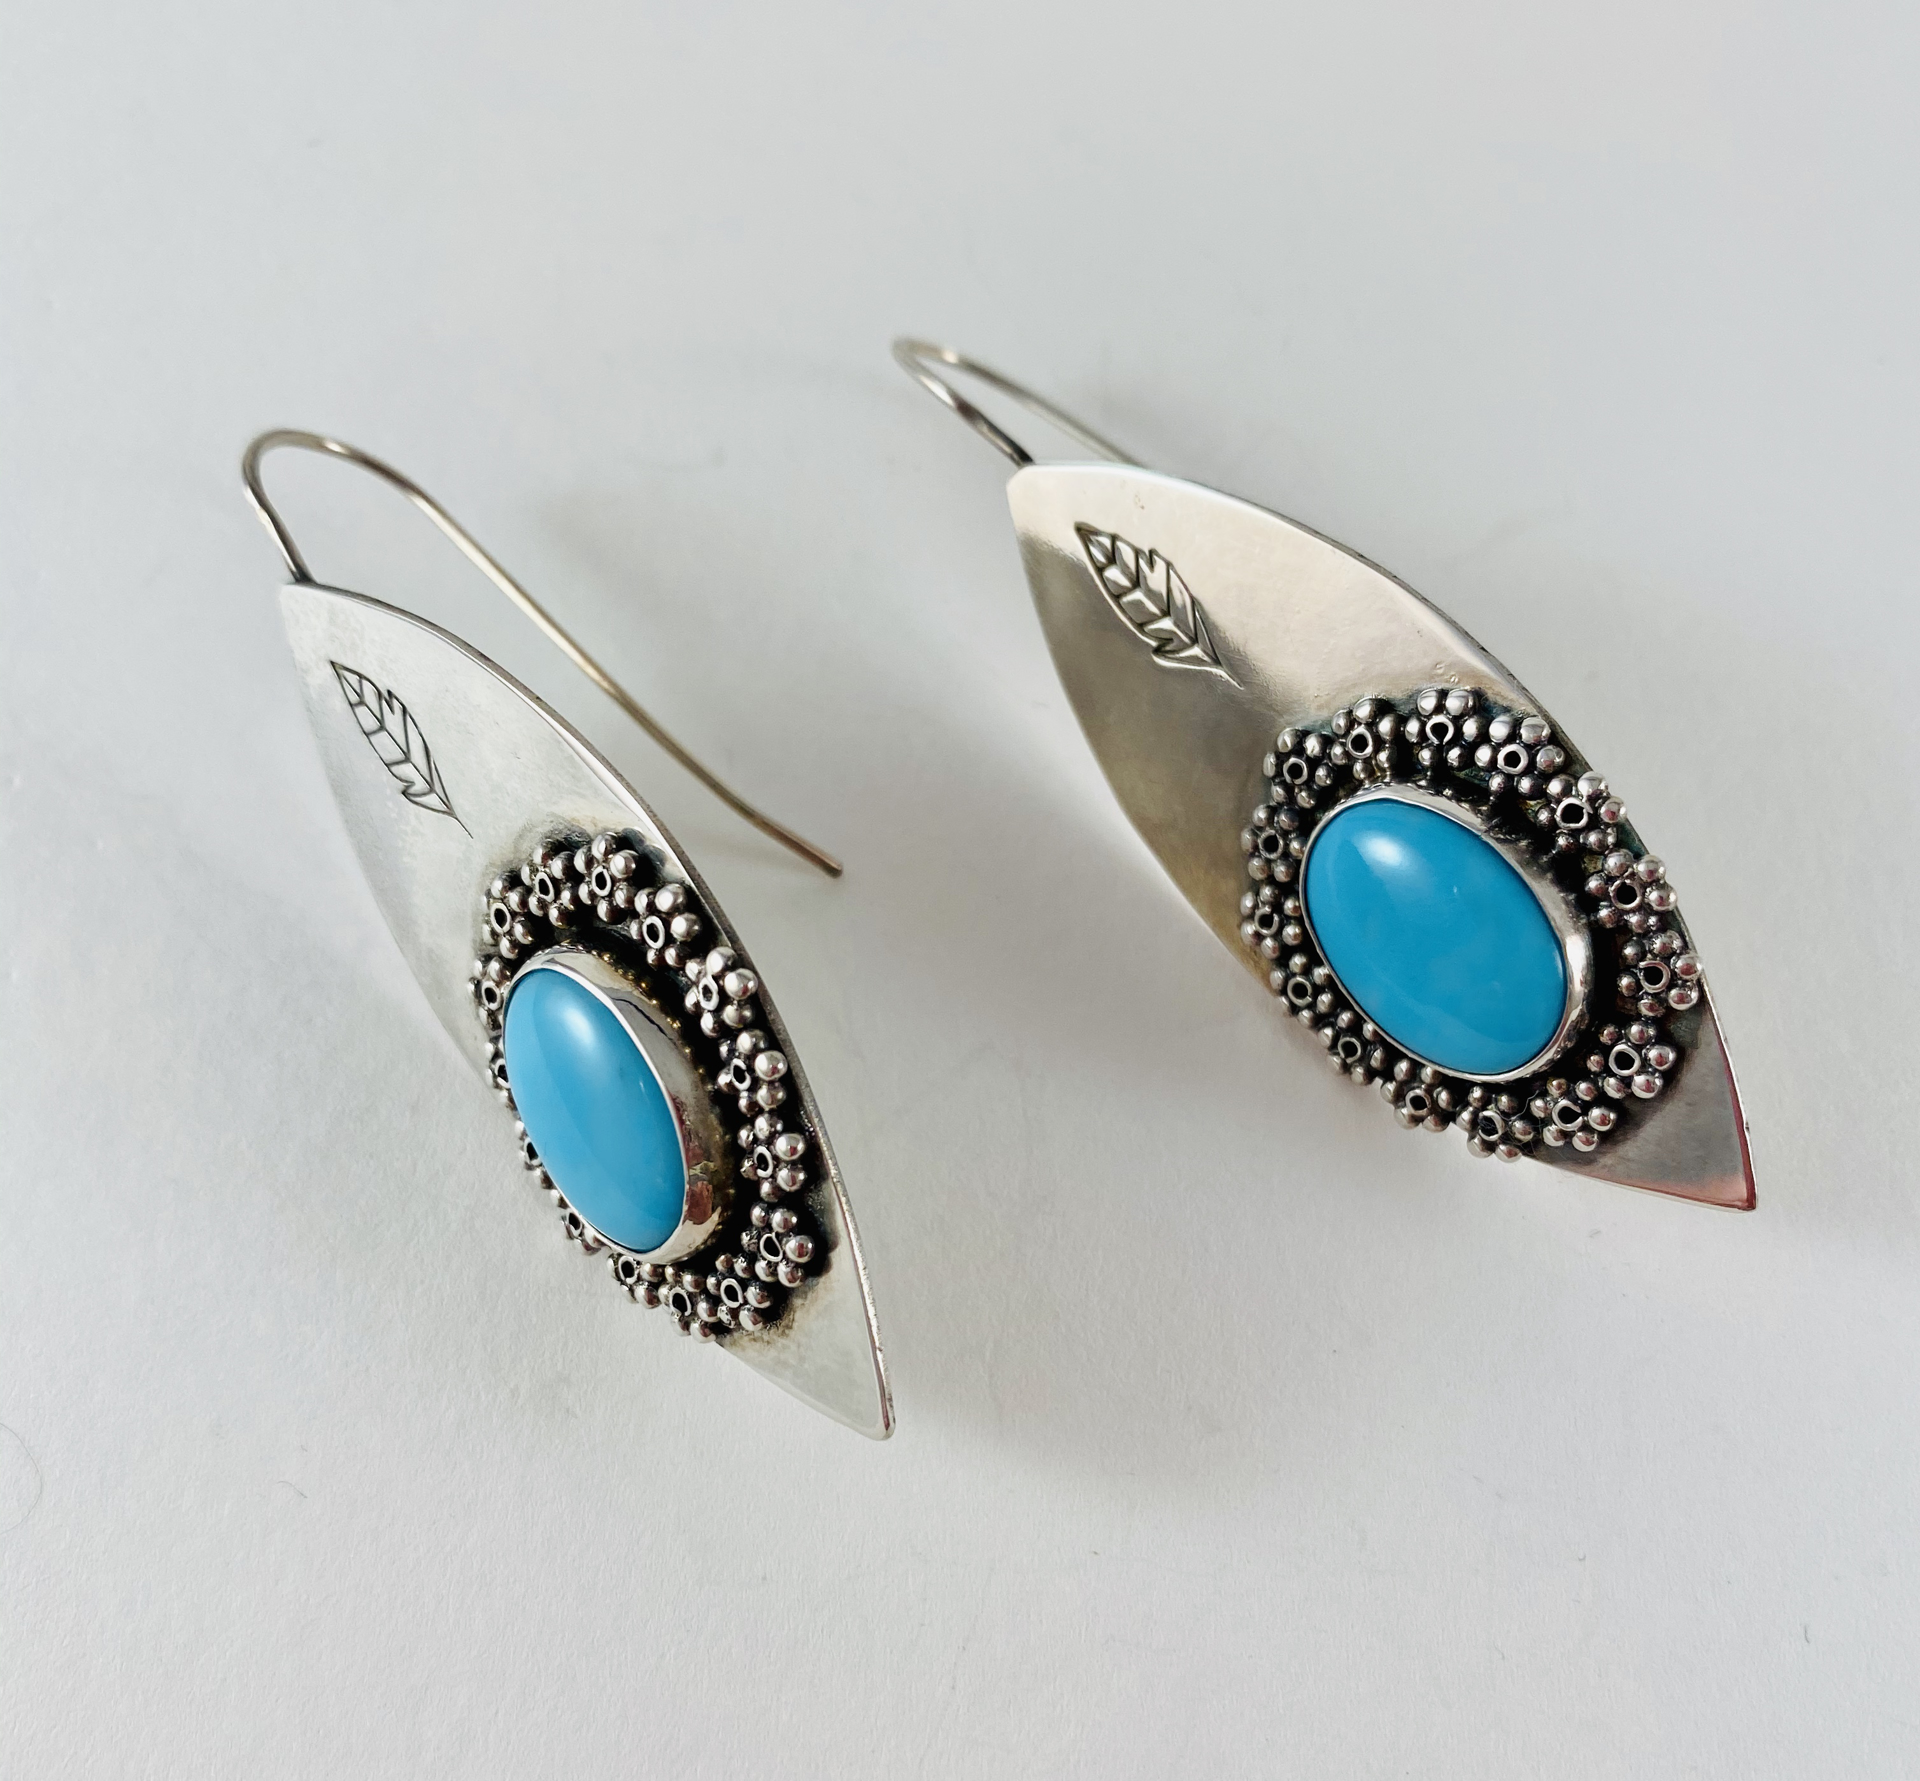 AB20-1 Sleeping Beauty Turquoise Sterling Earrings by Anne Bivens